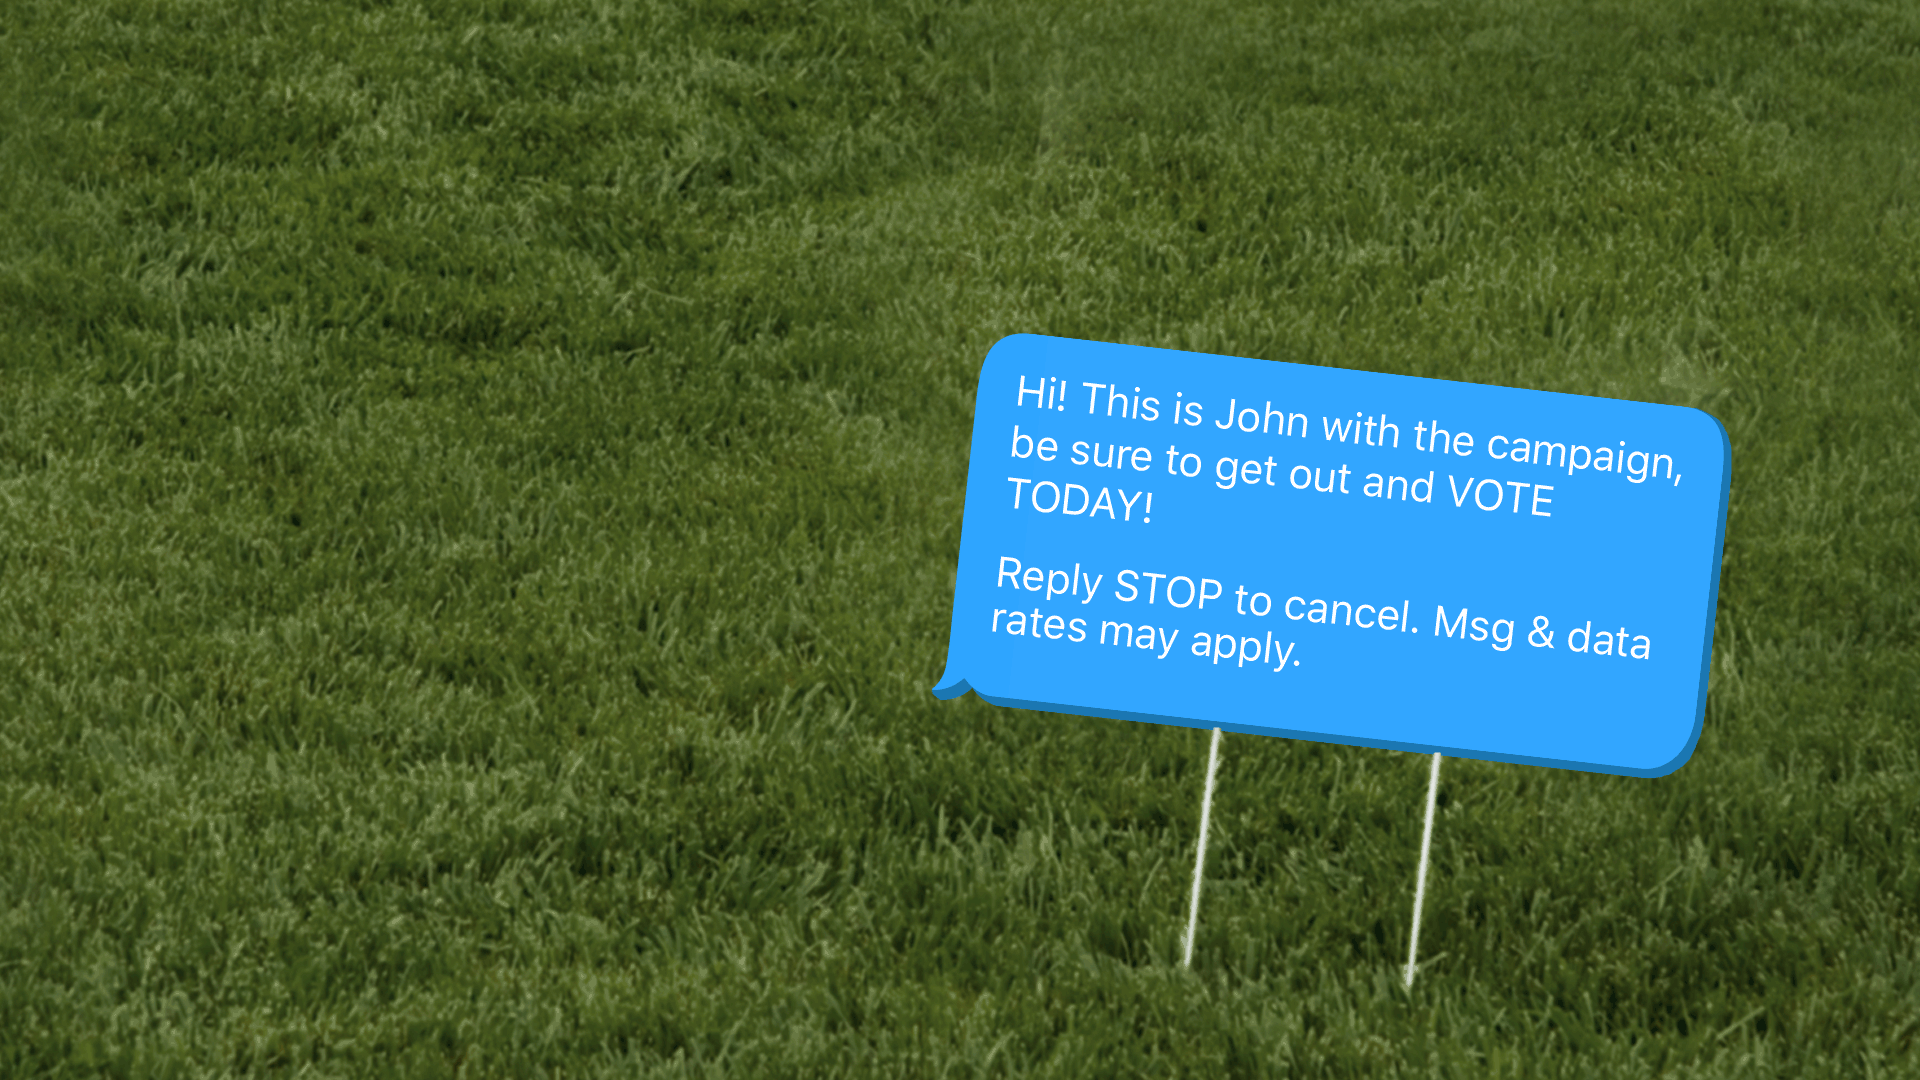 This illustration shows a yard sign that reads "This is John with the campaign, be sure to get out and VOTE TODAY!"